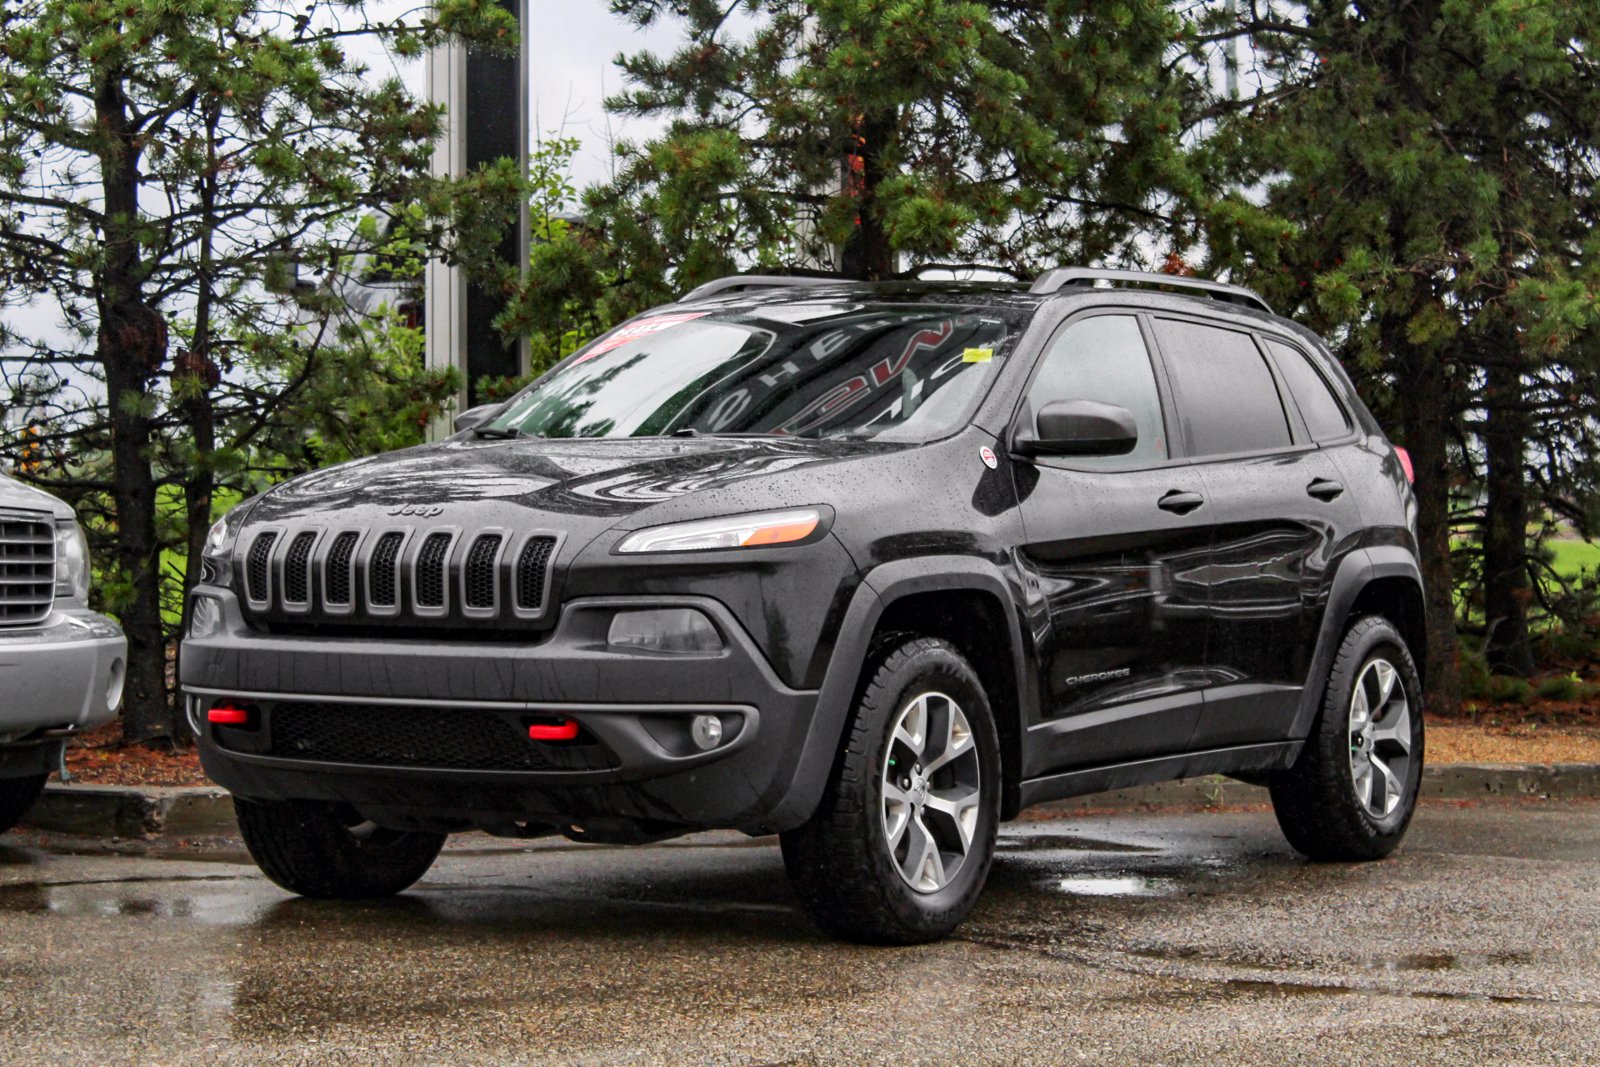 PreOwned 2014 Jeep Cherokee Trailhawk V6 4X4 4WD Sport